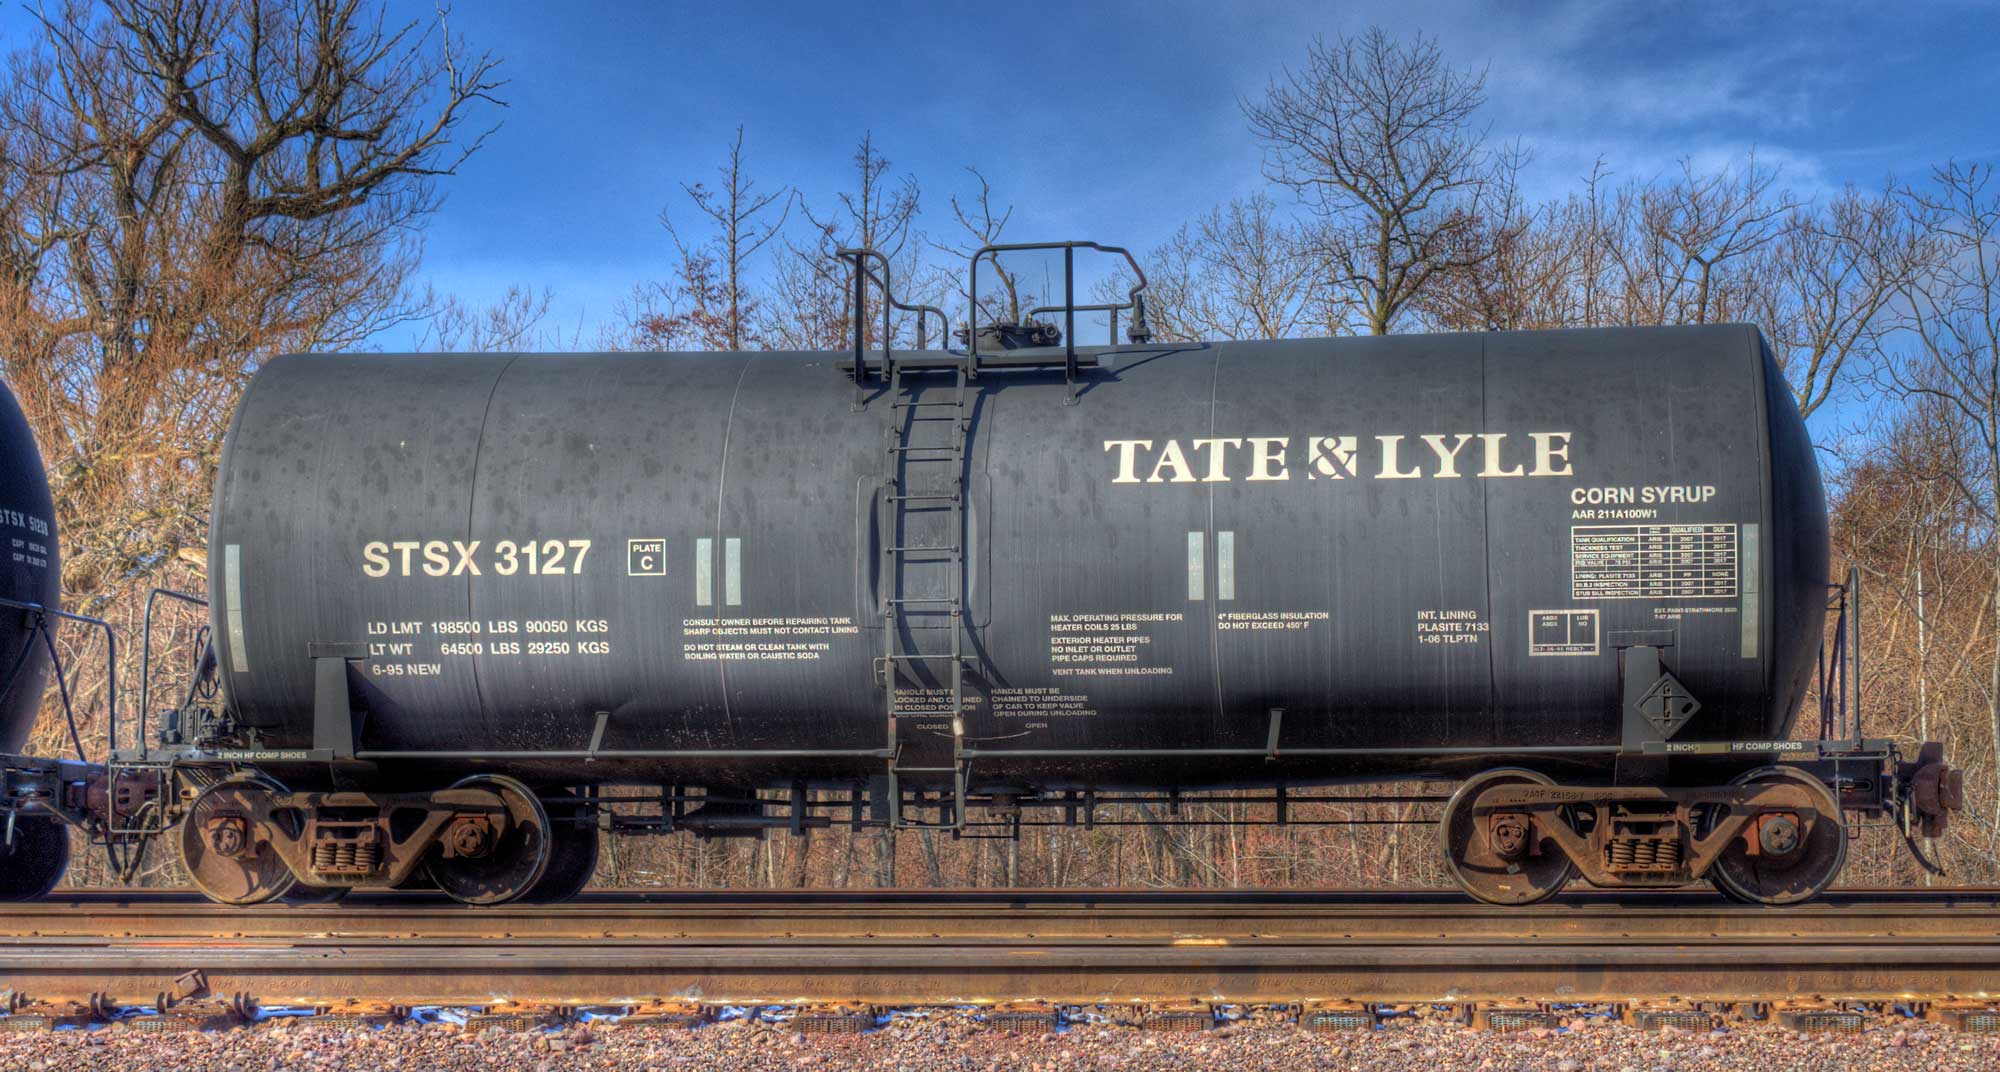 Photograph of a black tanker railcar sitting on a railroad track. The side of the car has lettering, including the label "corn syrup."